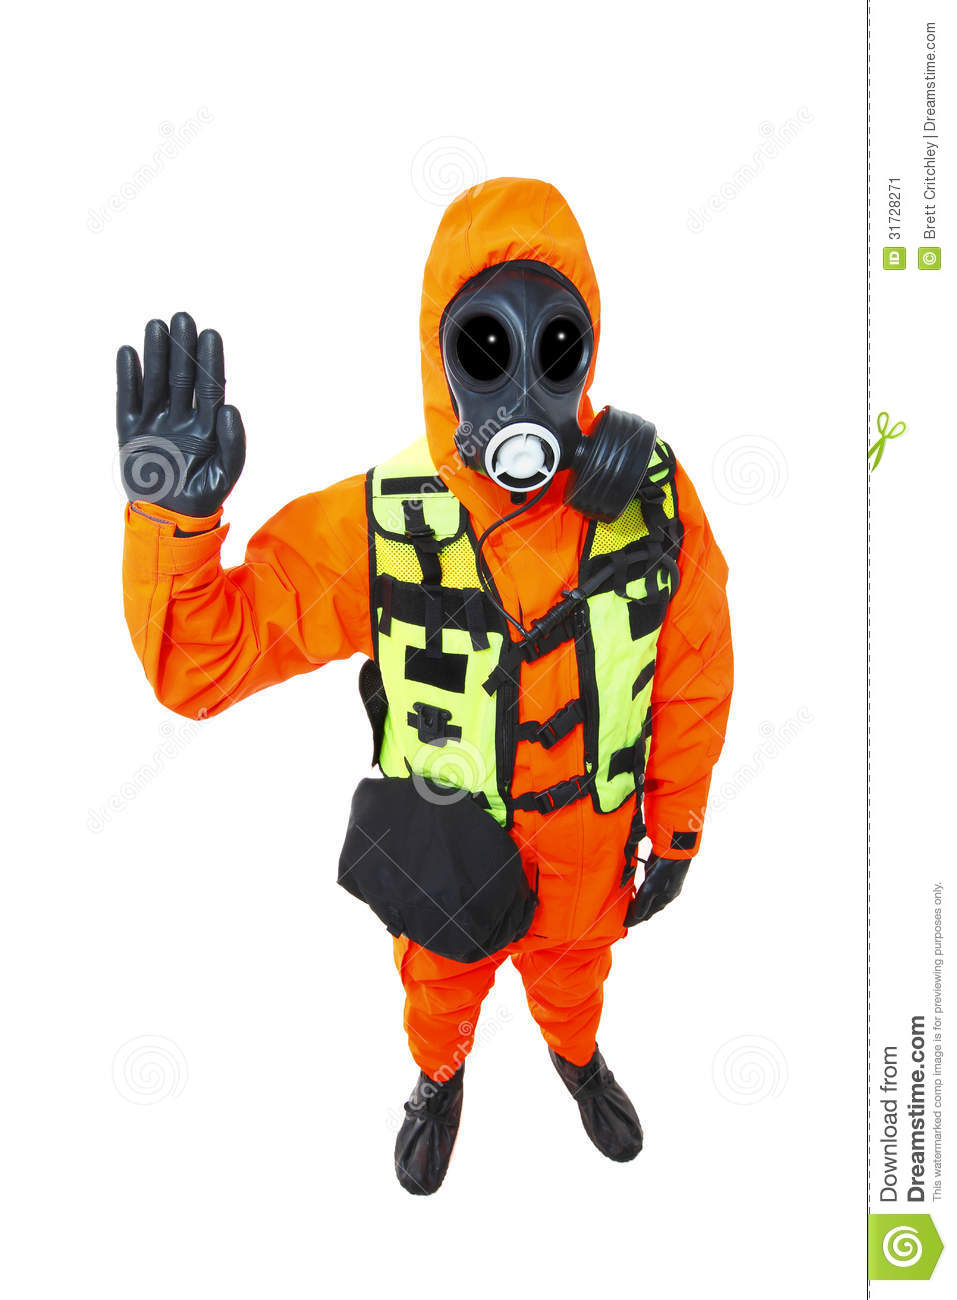 Full Body Hazmat Suit With Gas Mask With A Stop Hand Signal On White